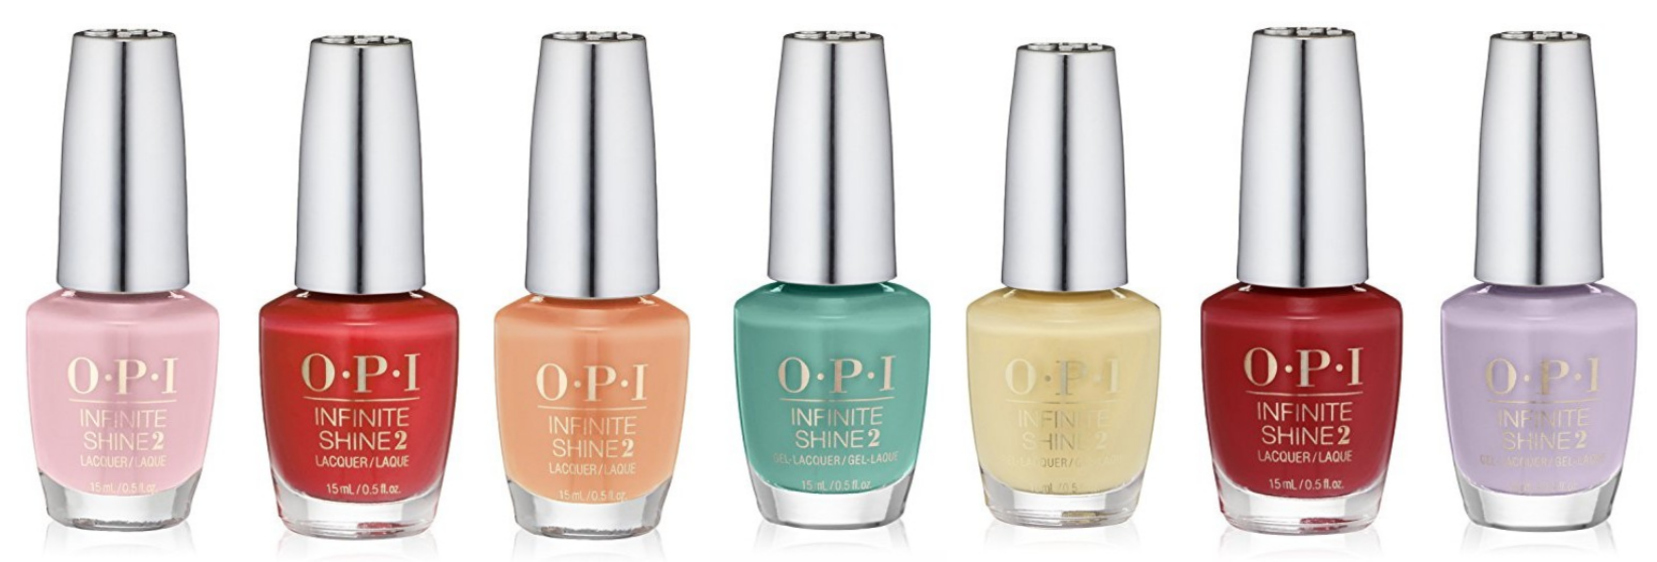 Select OPI Infinite Shine Nail Polish ONLY $5.97 Shipped (Add-on Items)